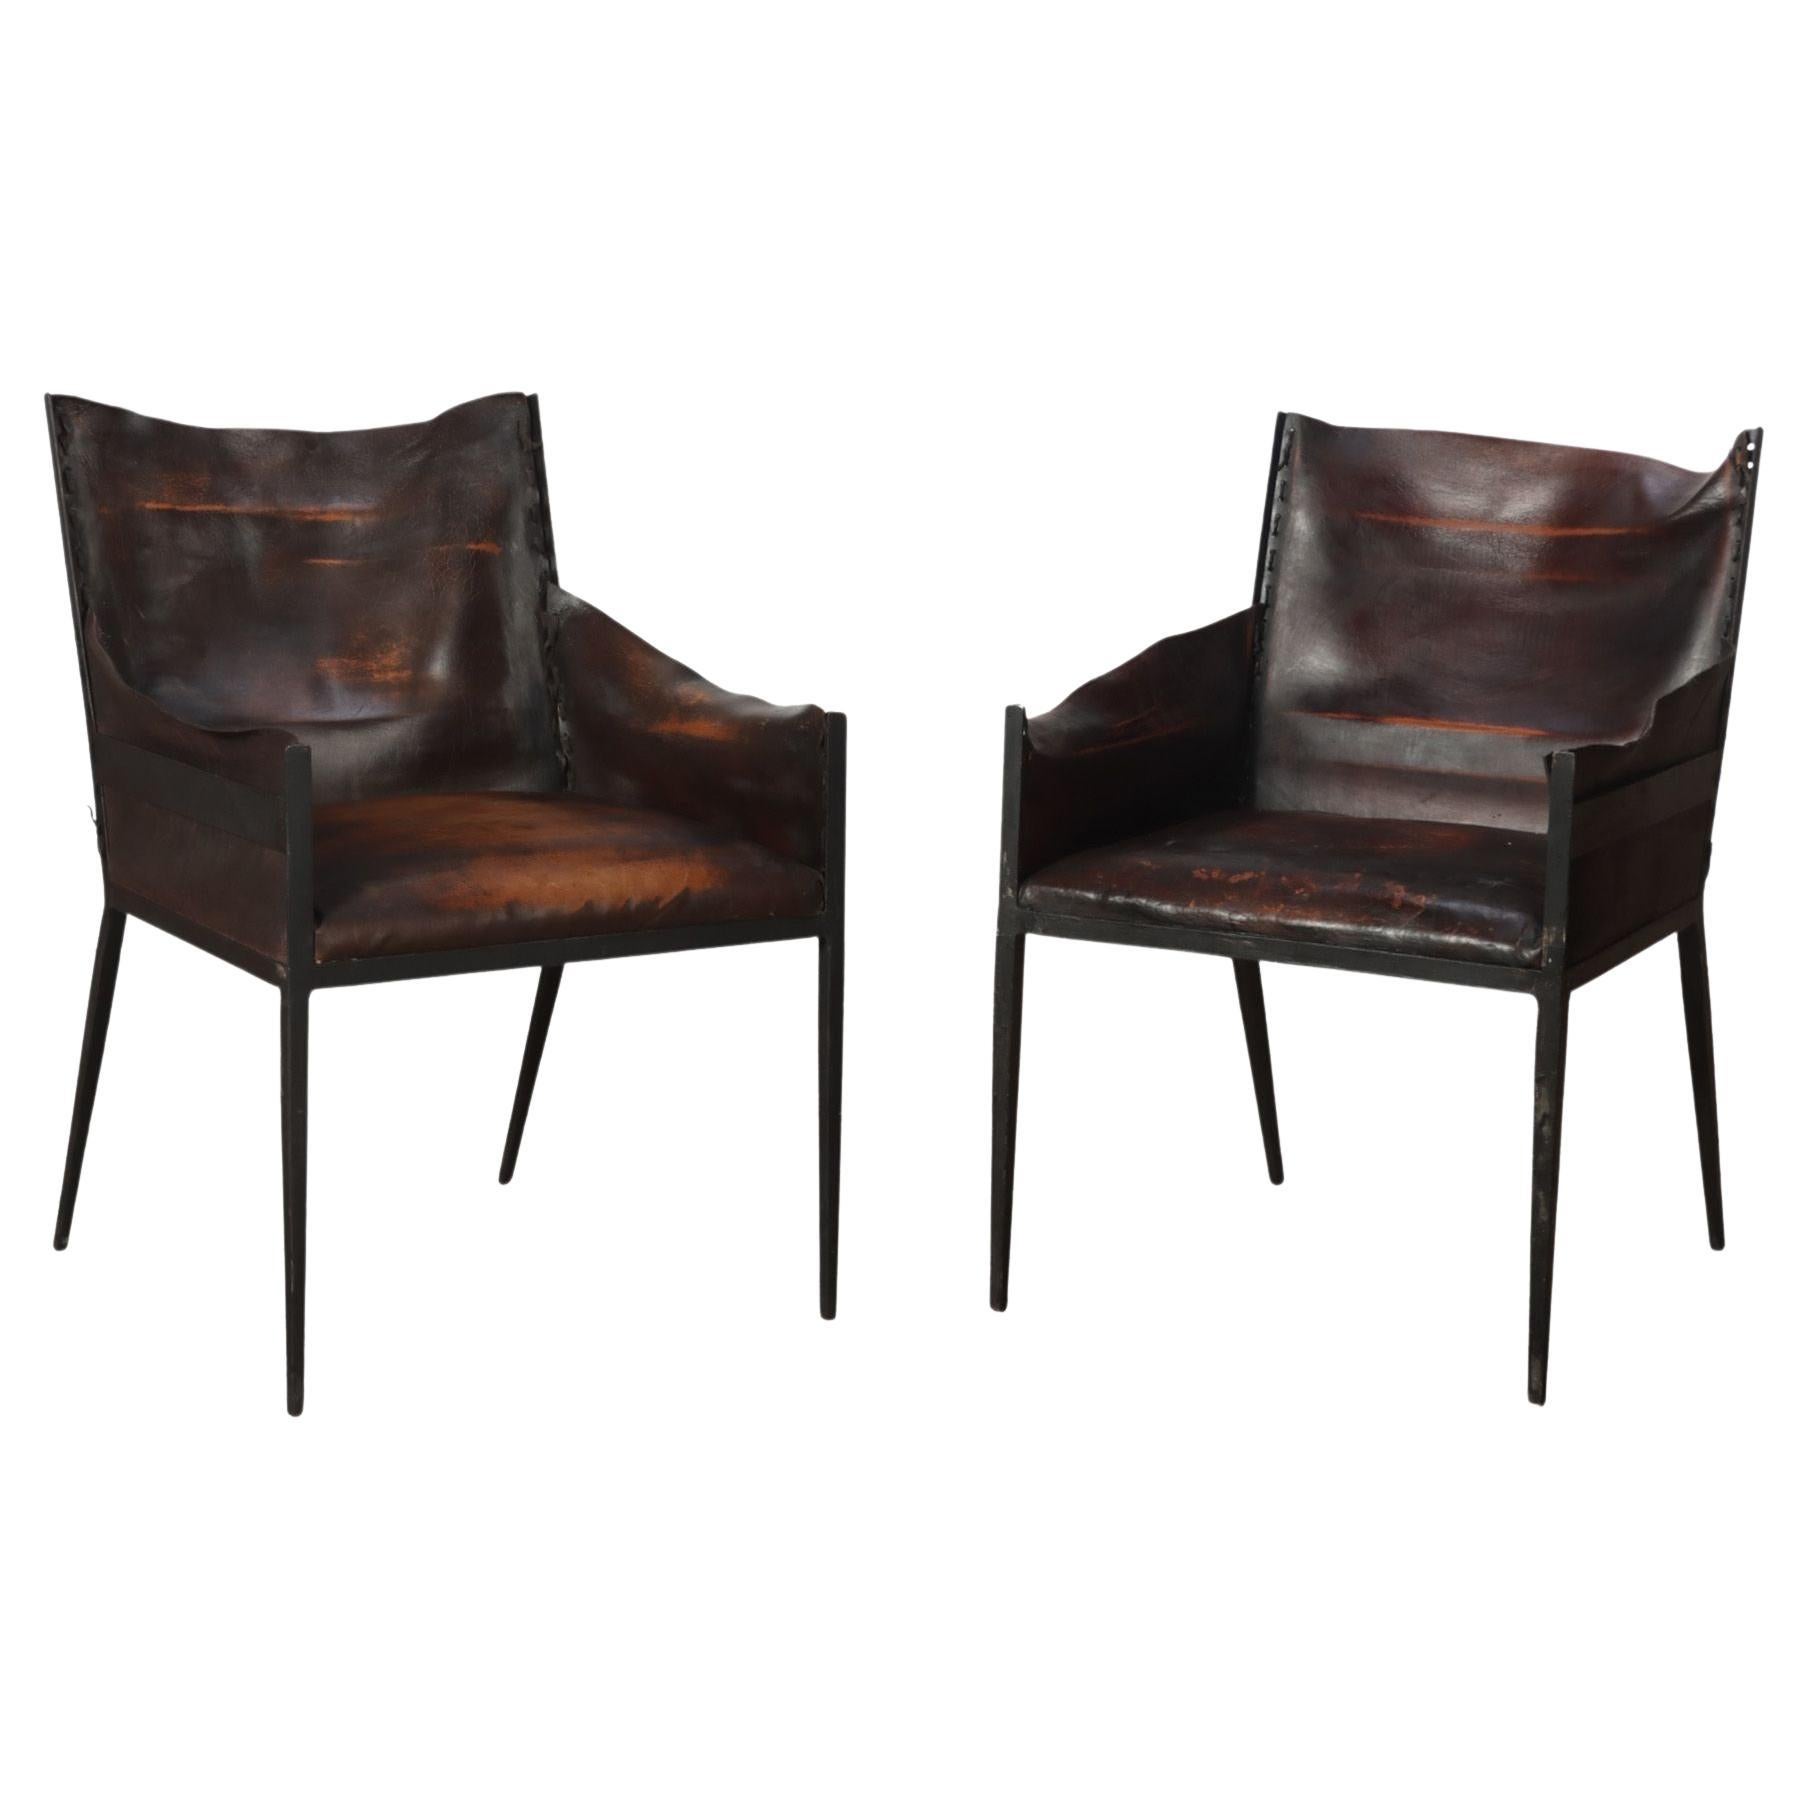 Pair of Vintage Iron and Leather Armchairs, Contemporary